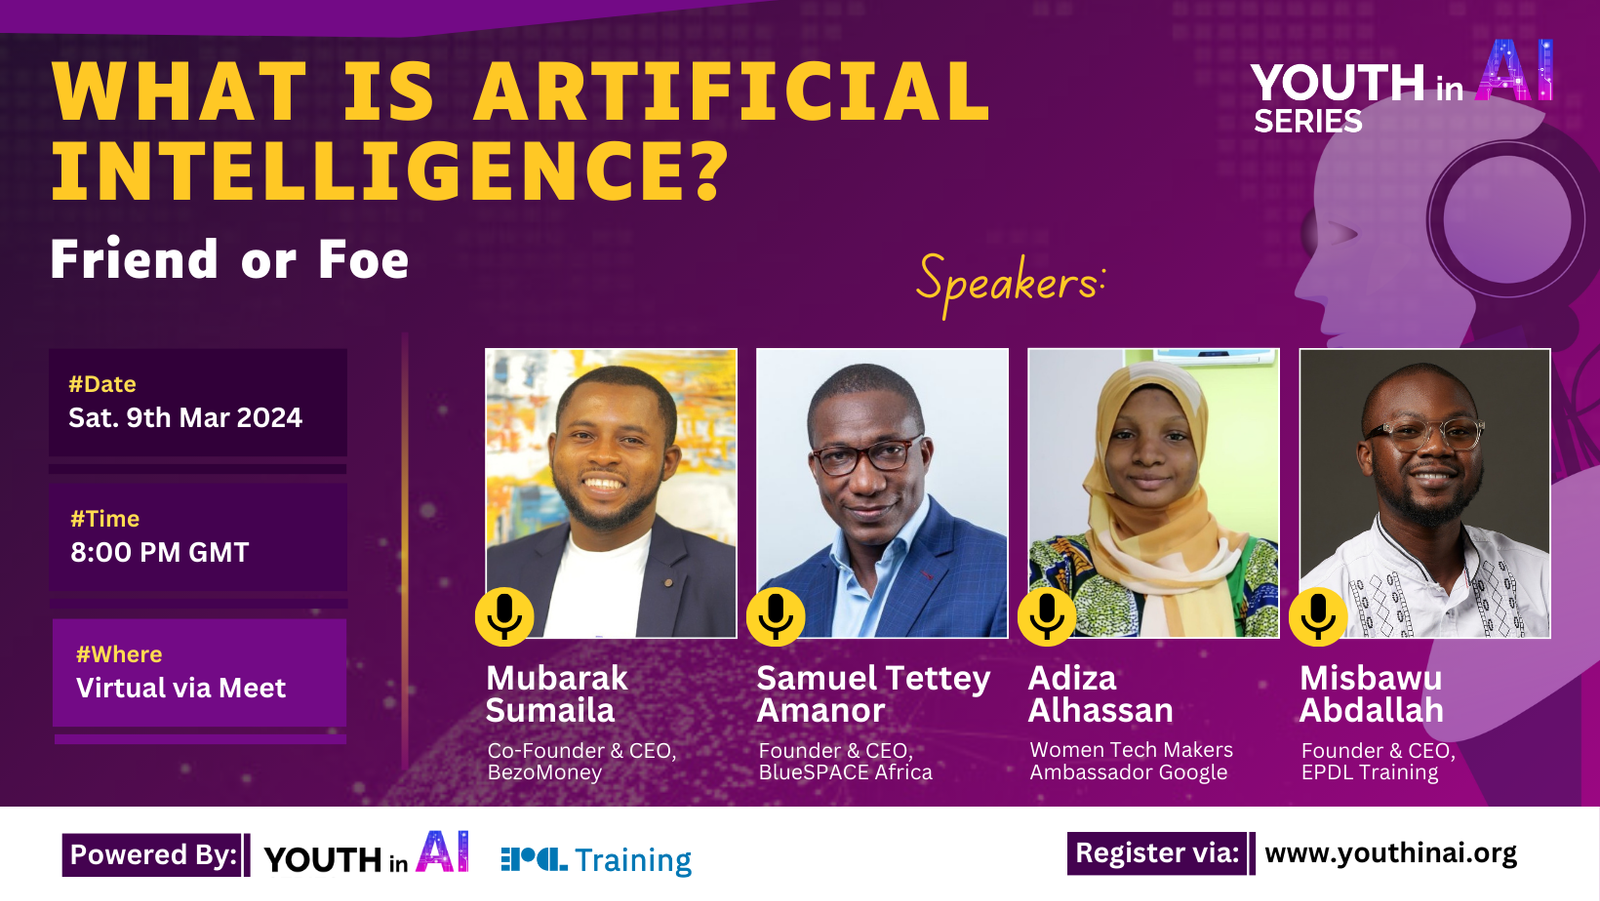 PRESS RELEASE: Youth in AI Series: What is Artificial Intelligence? Friend or Foe